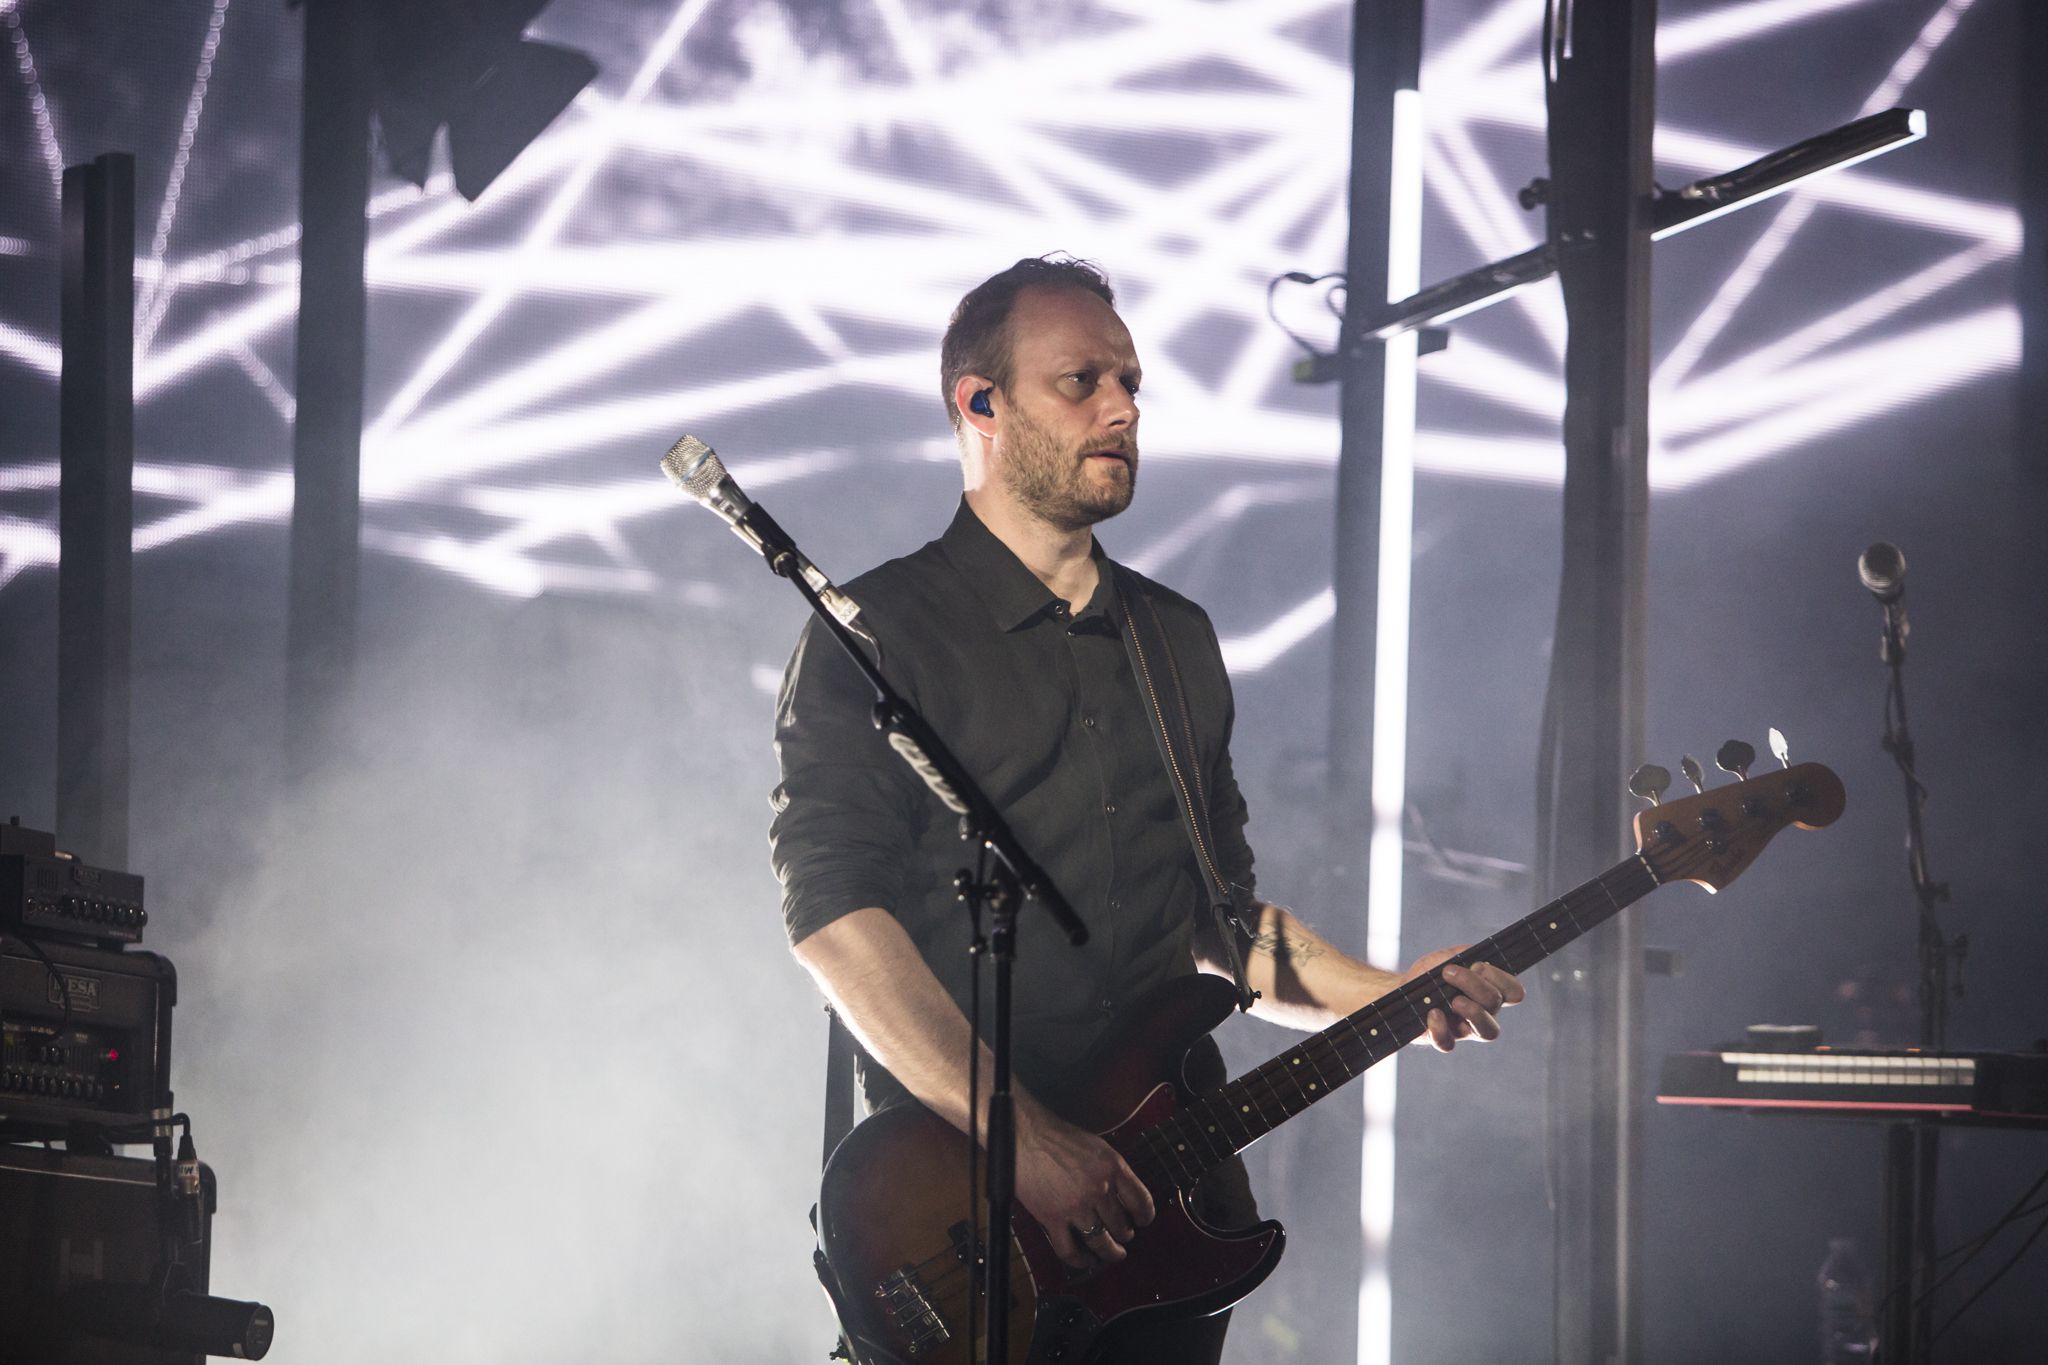 sigur ros 14 Live Review: Sigur Rós at the Fox Theater in Pomona (4/10)